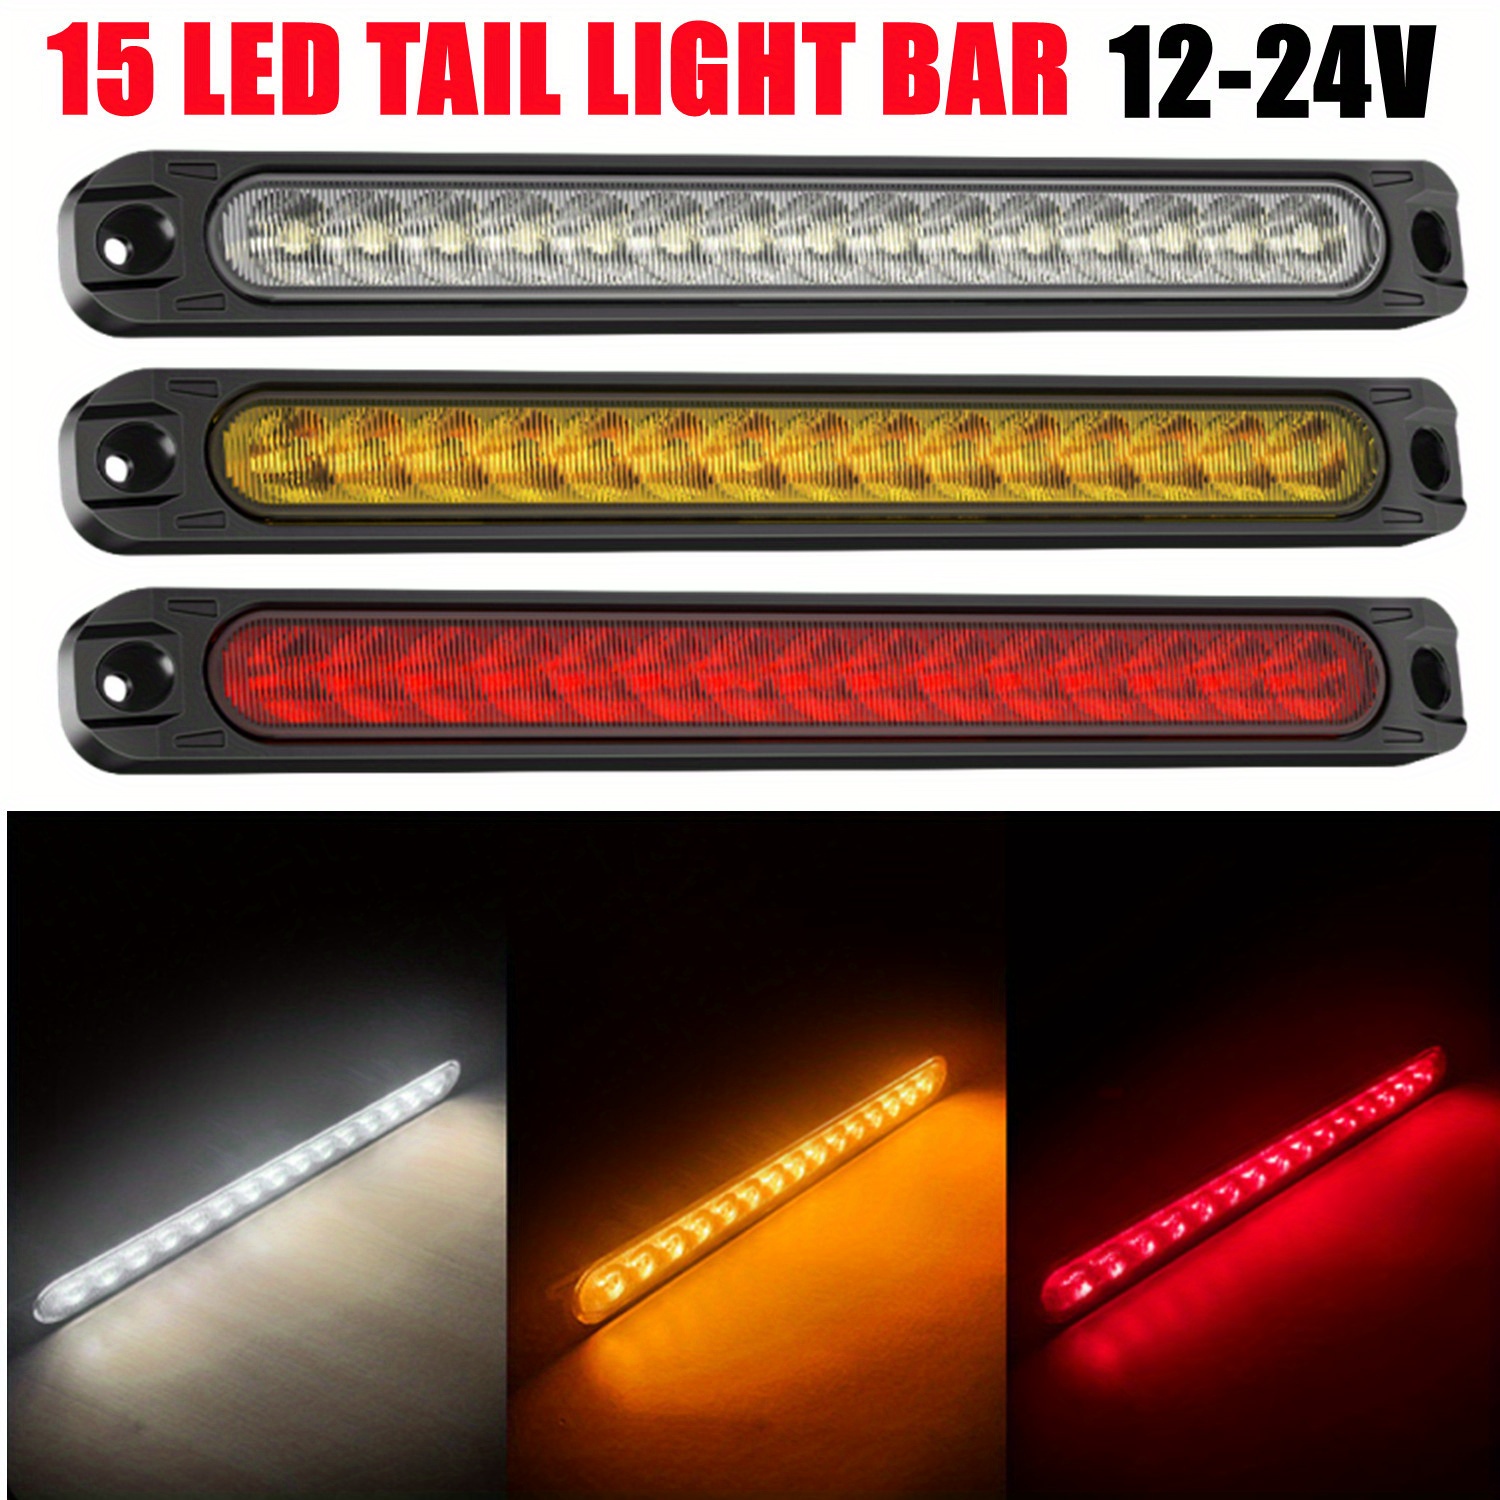 10pcs 12V Interior LED Light Bar, 11.81inch 19.69inch 5630 SMD LED Light  Strip With Switch For Car, Trailer, Truck Bed, Van, RV, Cargo, Boat,  Cabinet